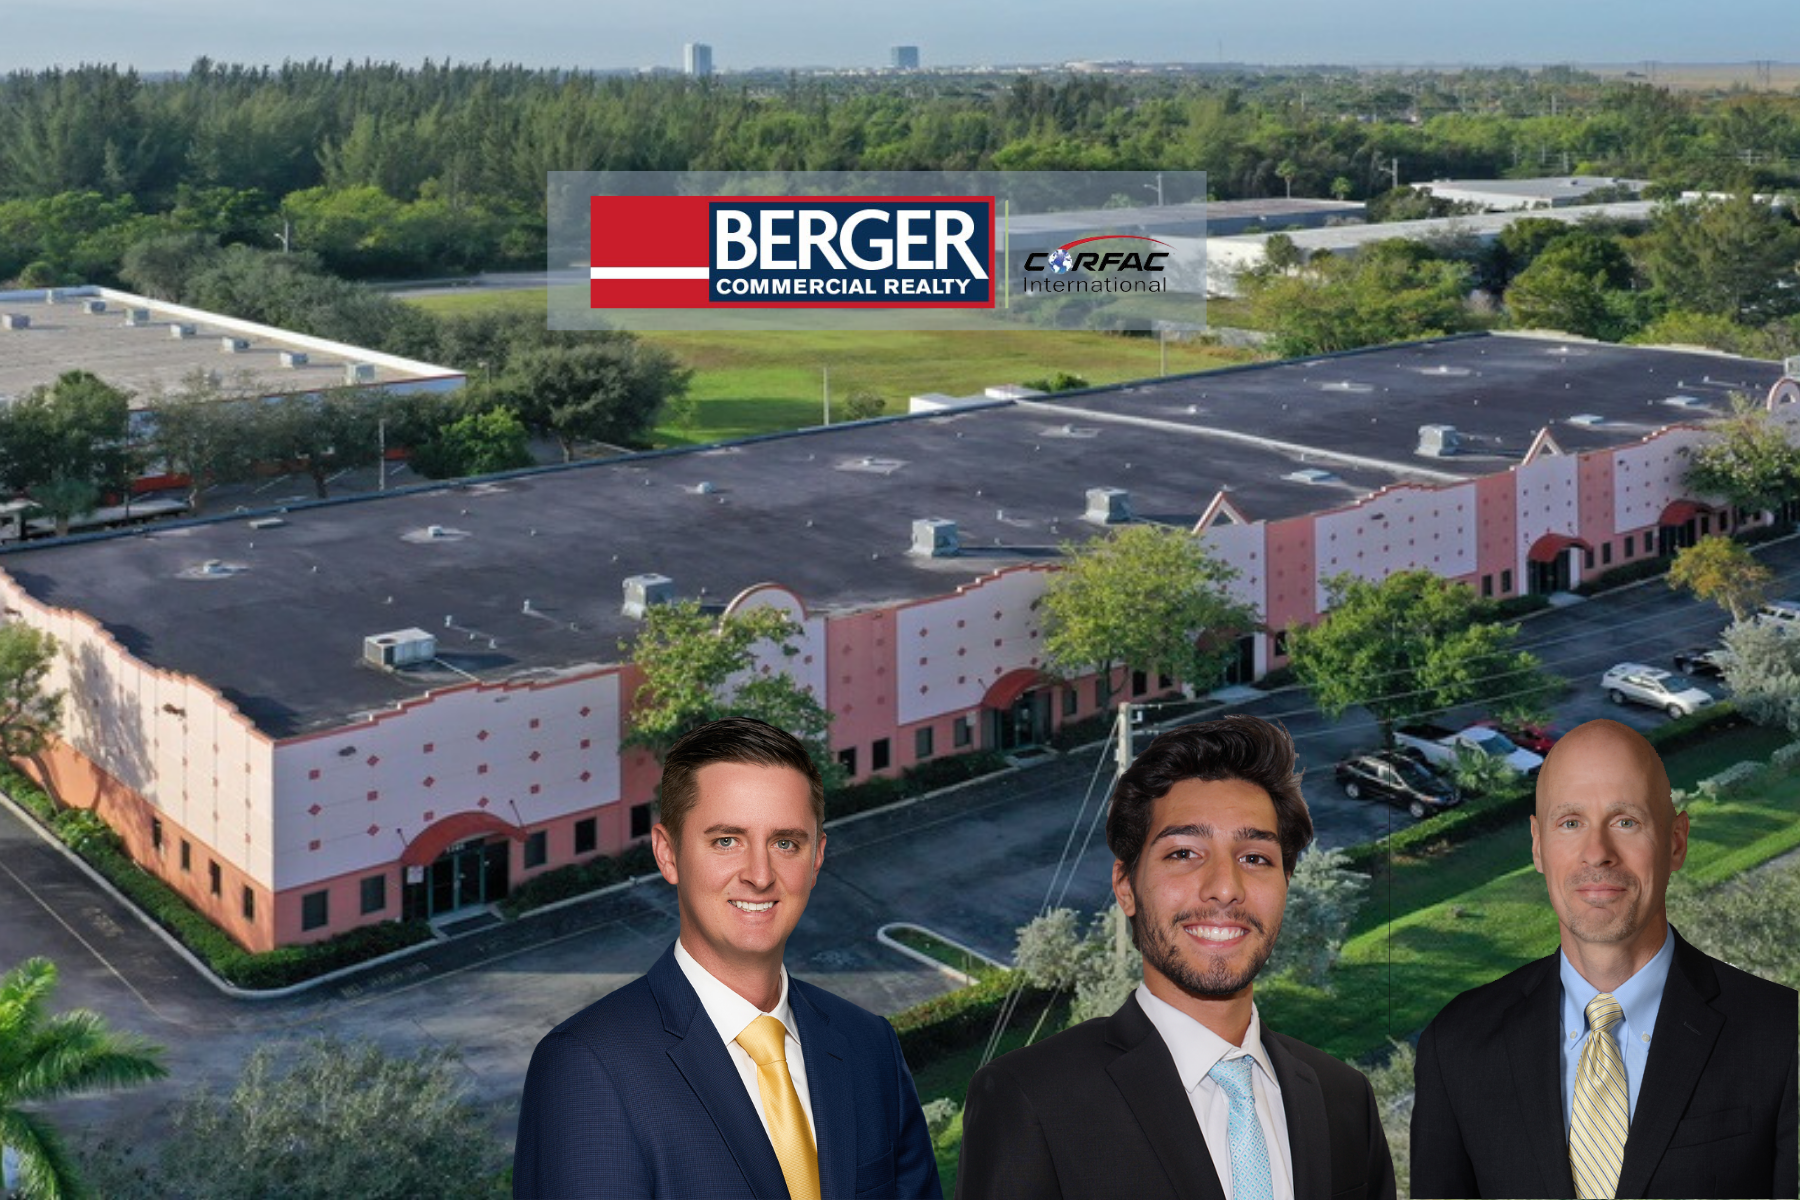 Berger Commercial Realty Awarded Leasing Assignment For Multi-Tenant Industrial Project